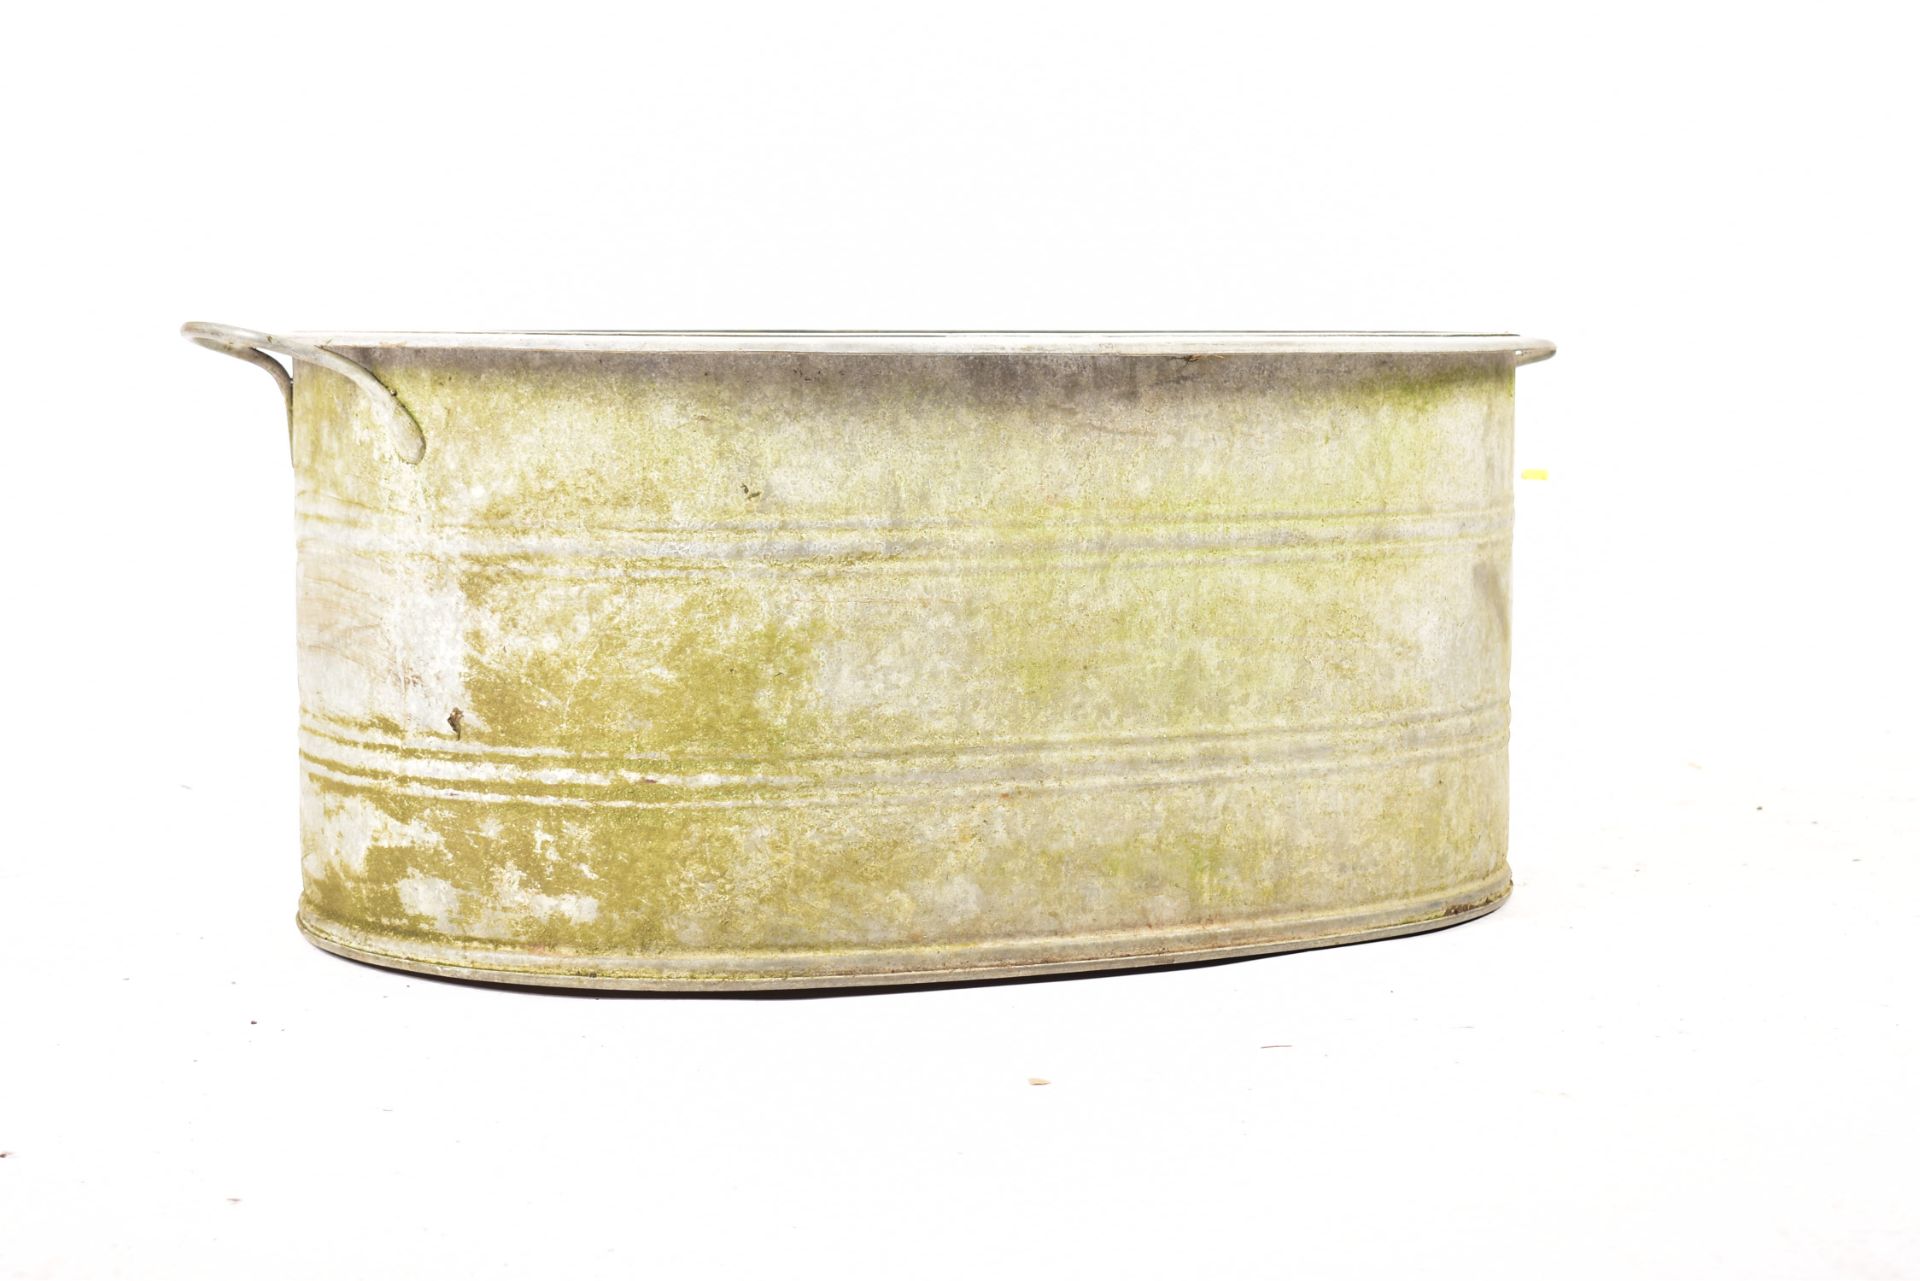 EARLY 20TH CENTURY LARGE OVAL GALVANISED TIN BATH - Image 6 of 6